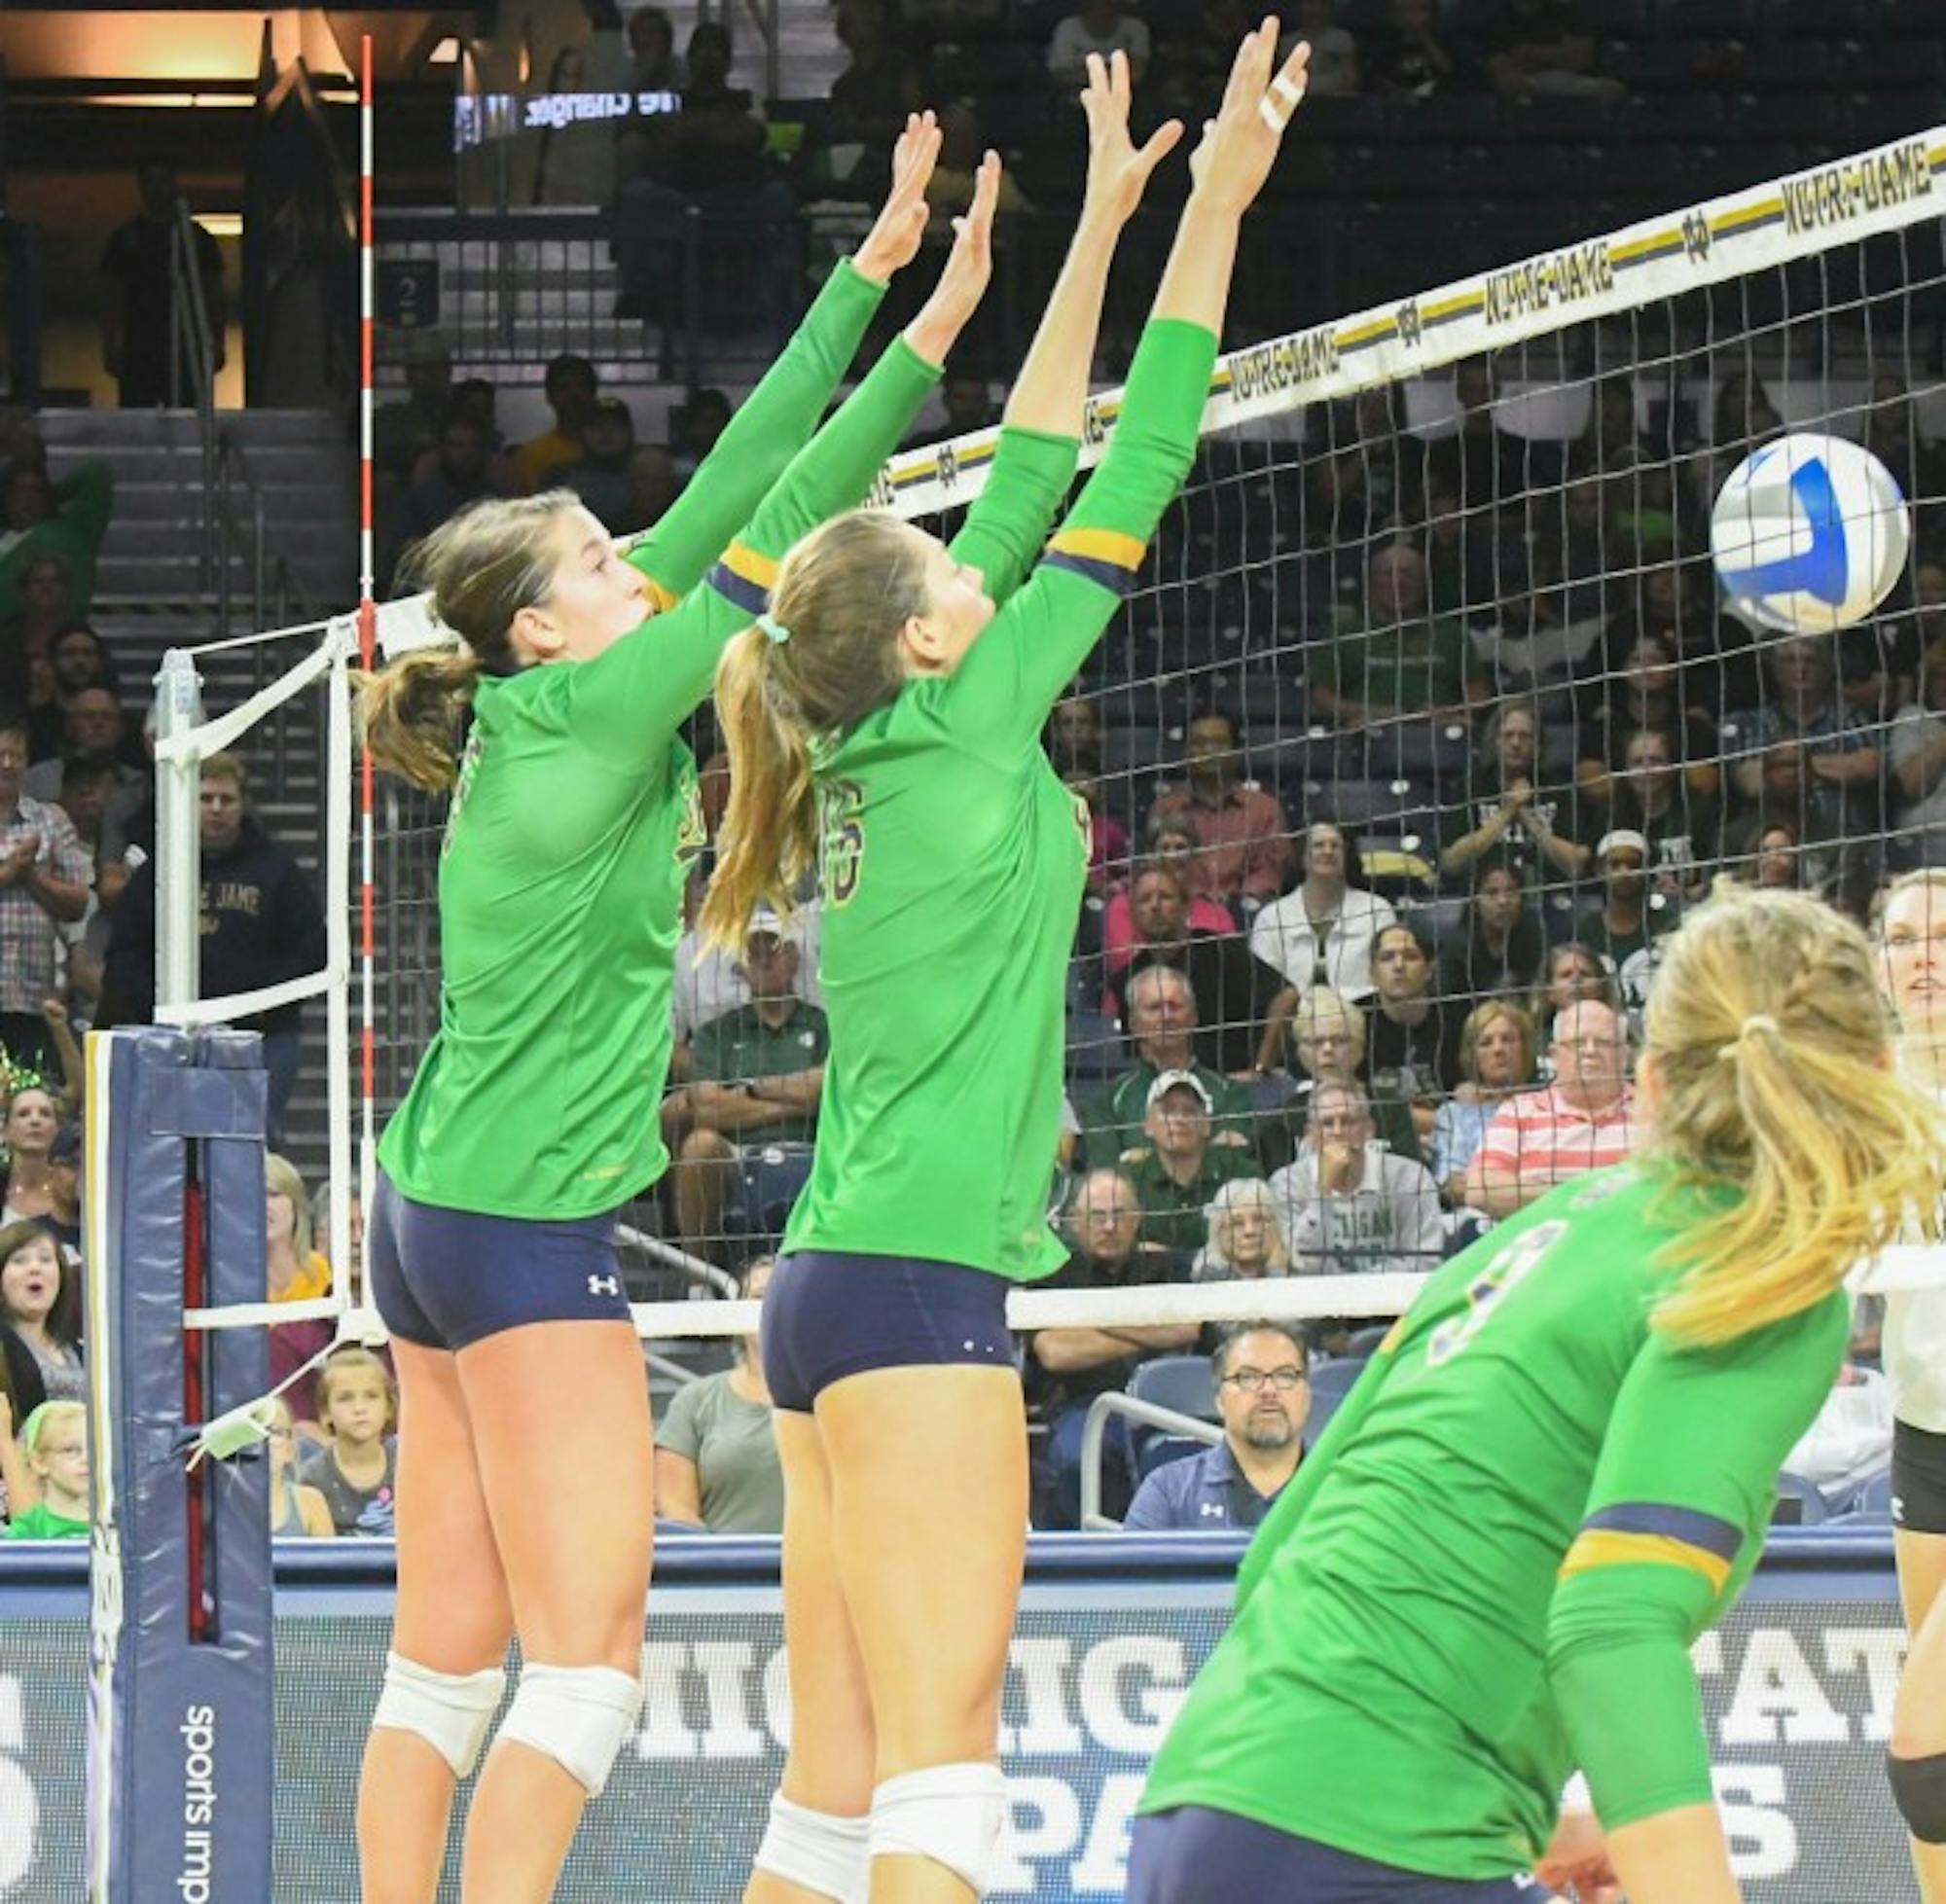 Irish junior middle blocker Meg Morningstar goes up to block during Notre Dame’s 3-0 win over MSU on Sept. 15 at Purcell Pavilion. Morningstar, along with four other players, had three or more blocks.